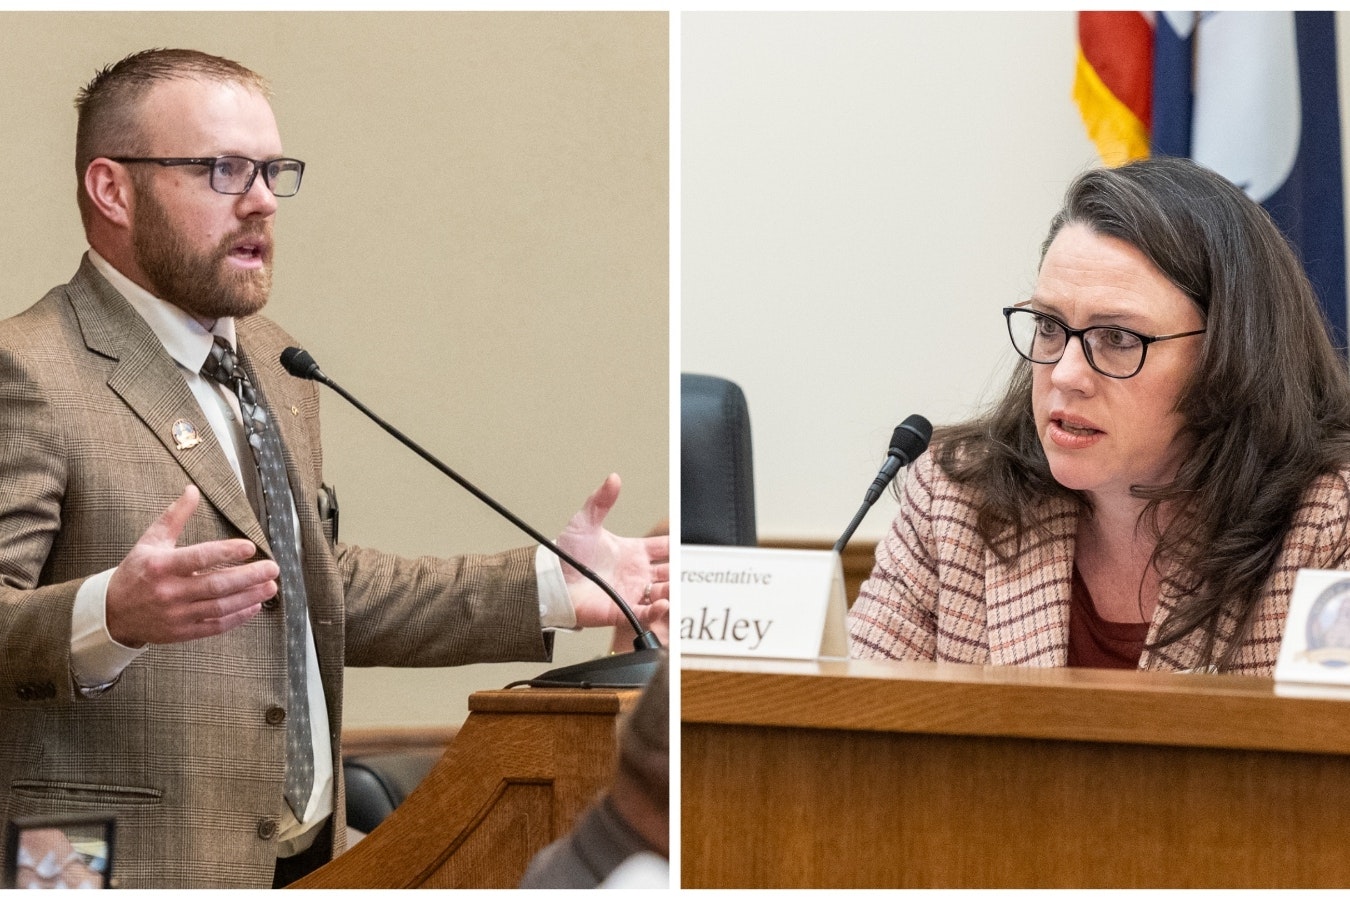 State Reps. Jeremy Haroldson, R-Wheatland, and Ember Oakley, R-Riverton